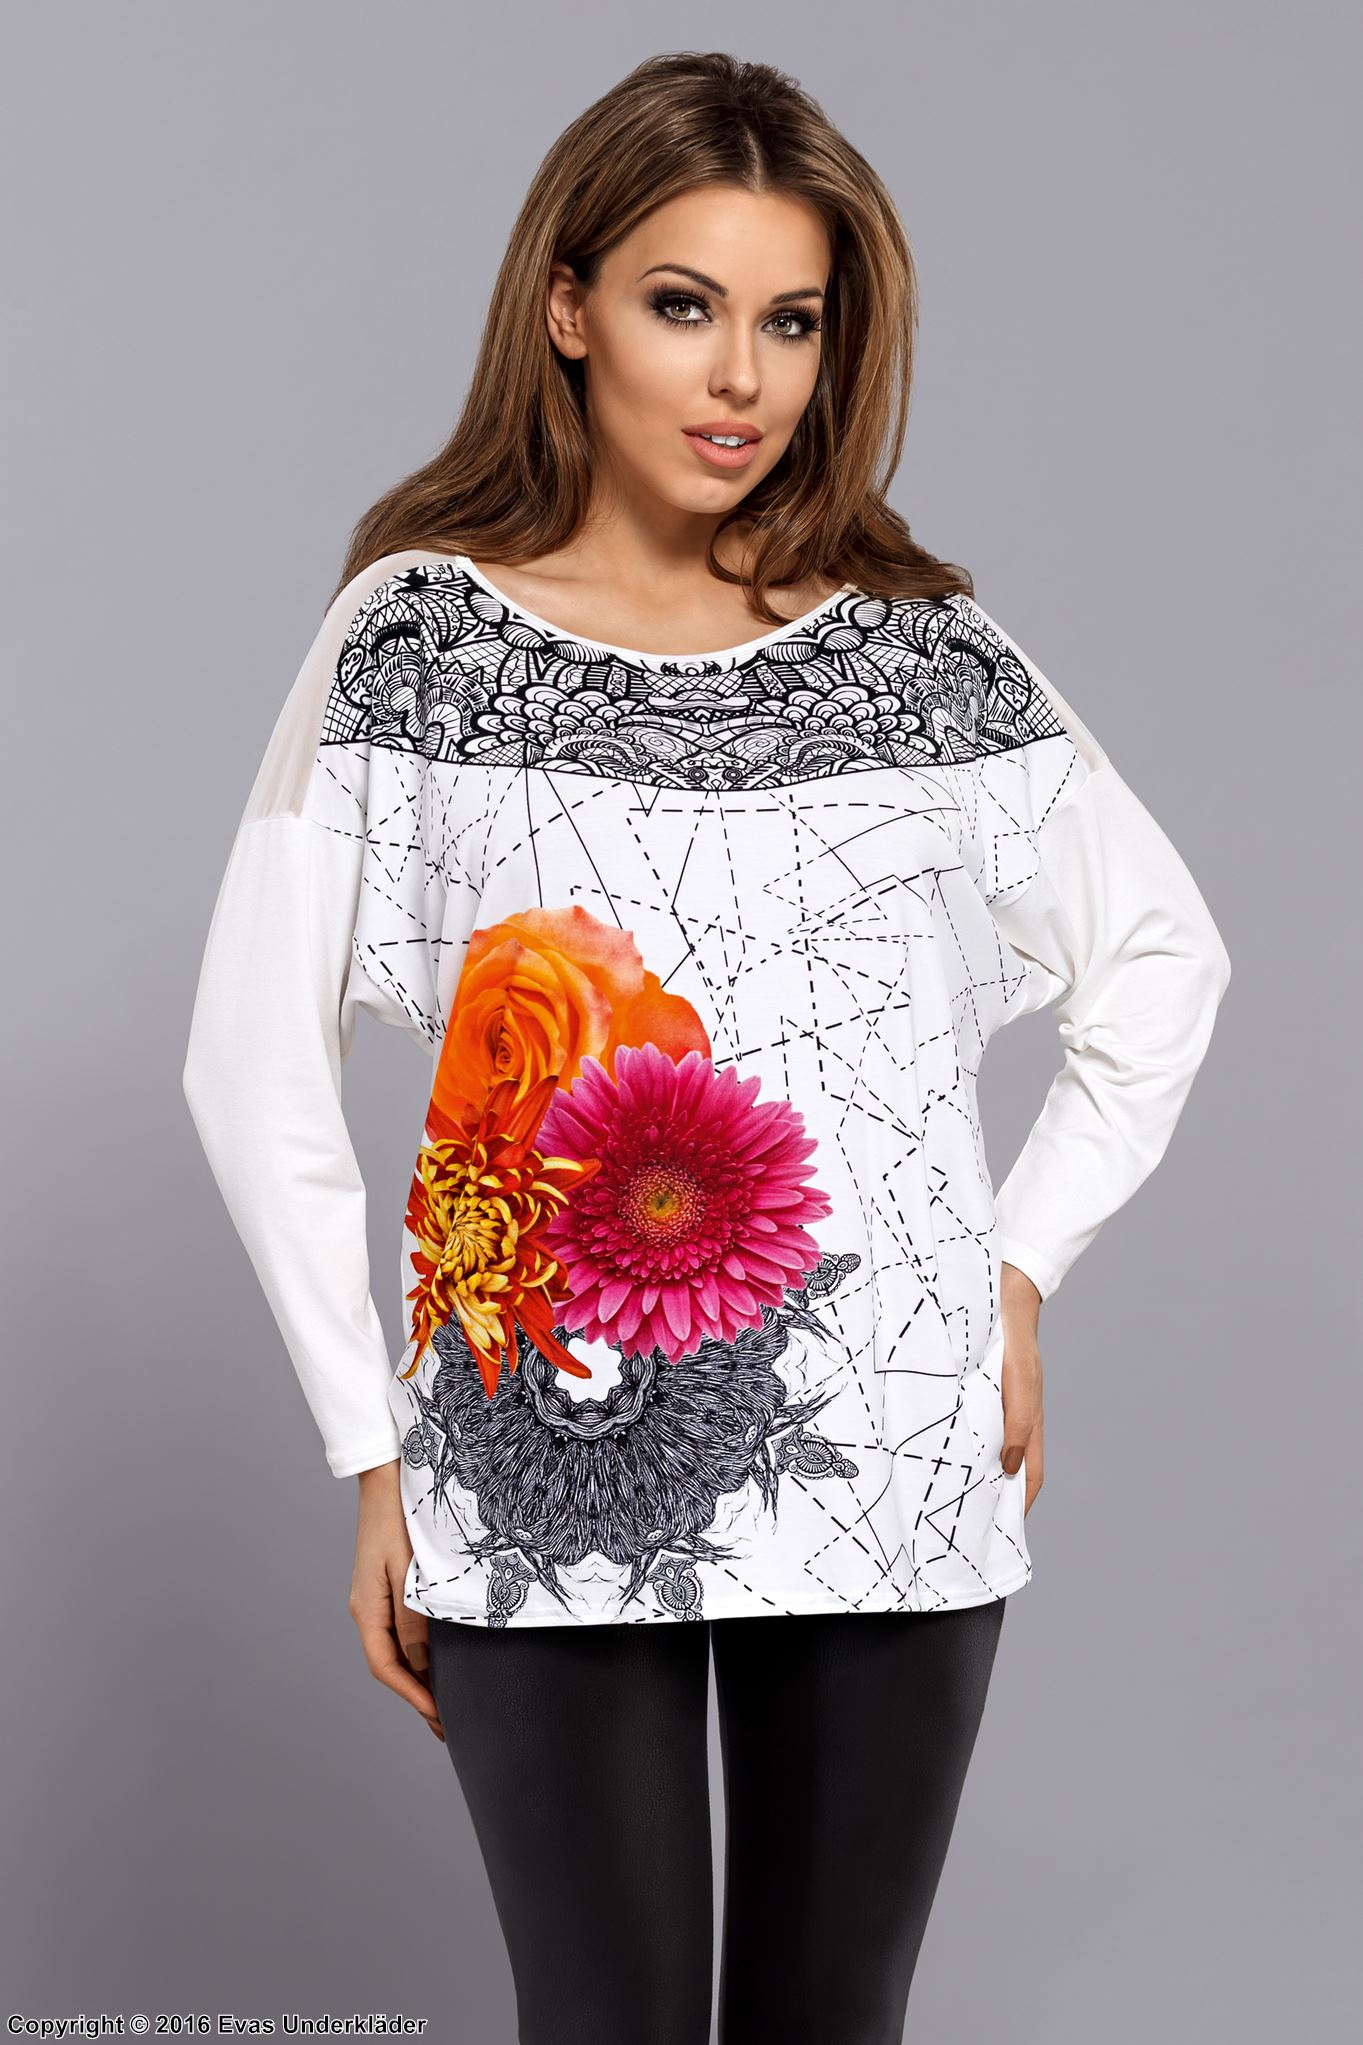 Long sleeve top, high quality viscose, mesh inlay, colorful flowers